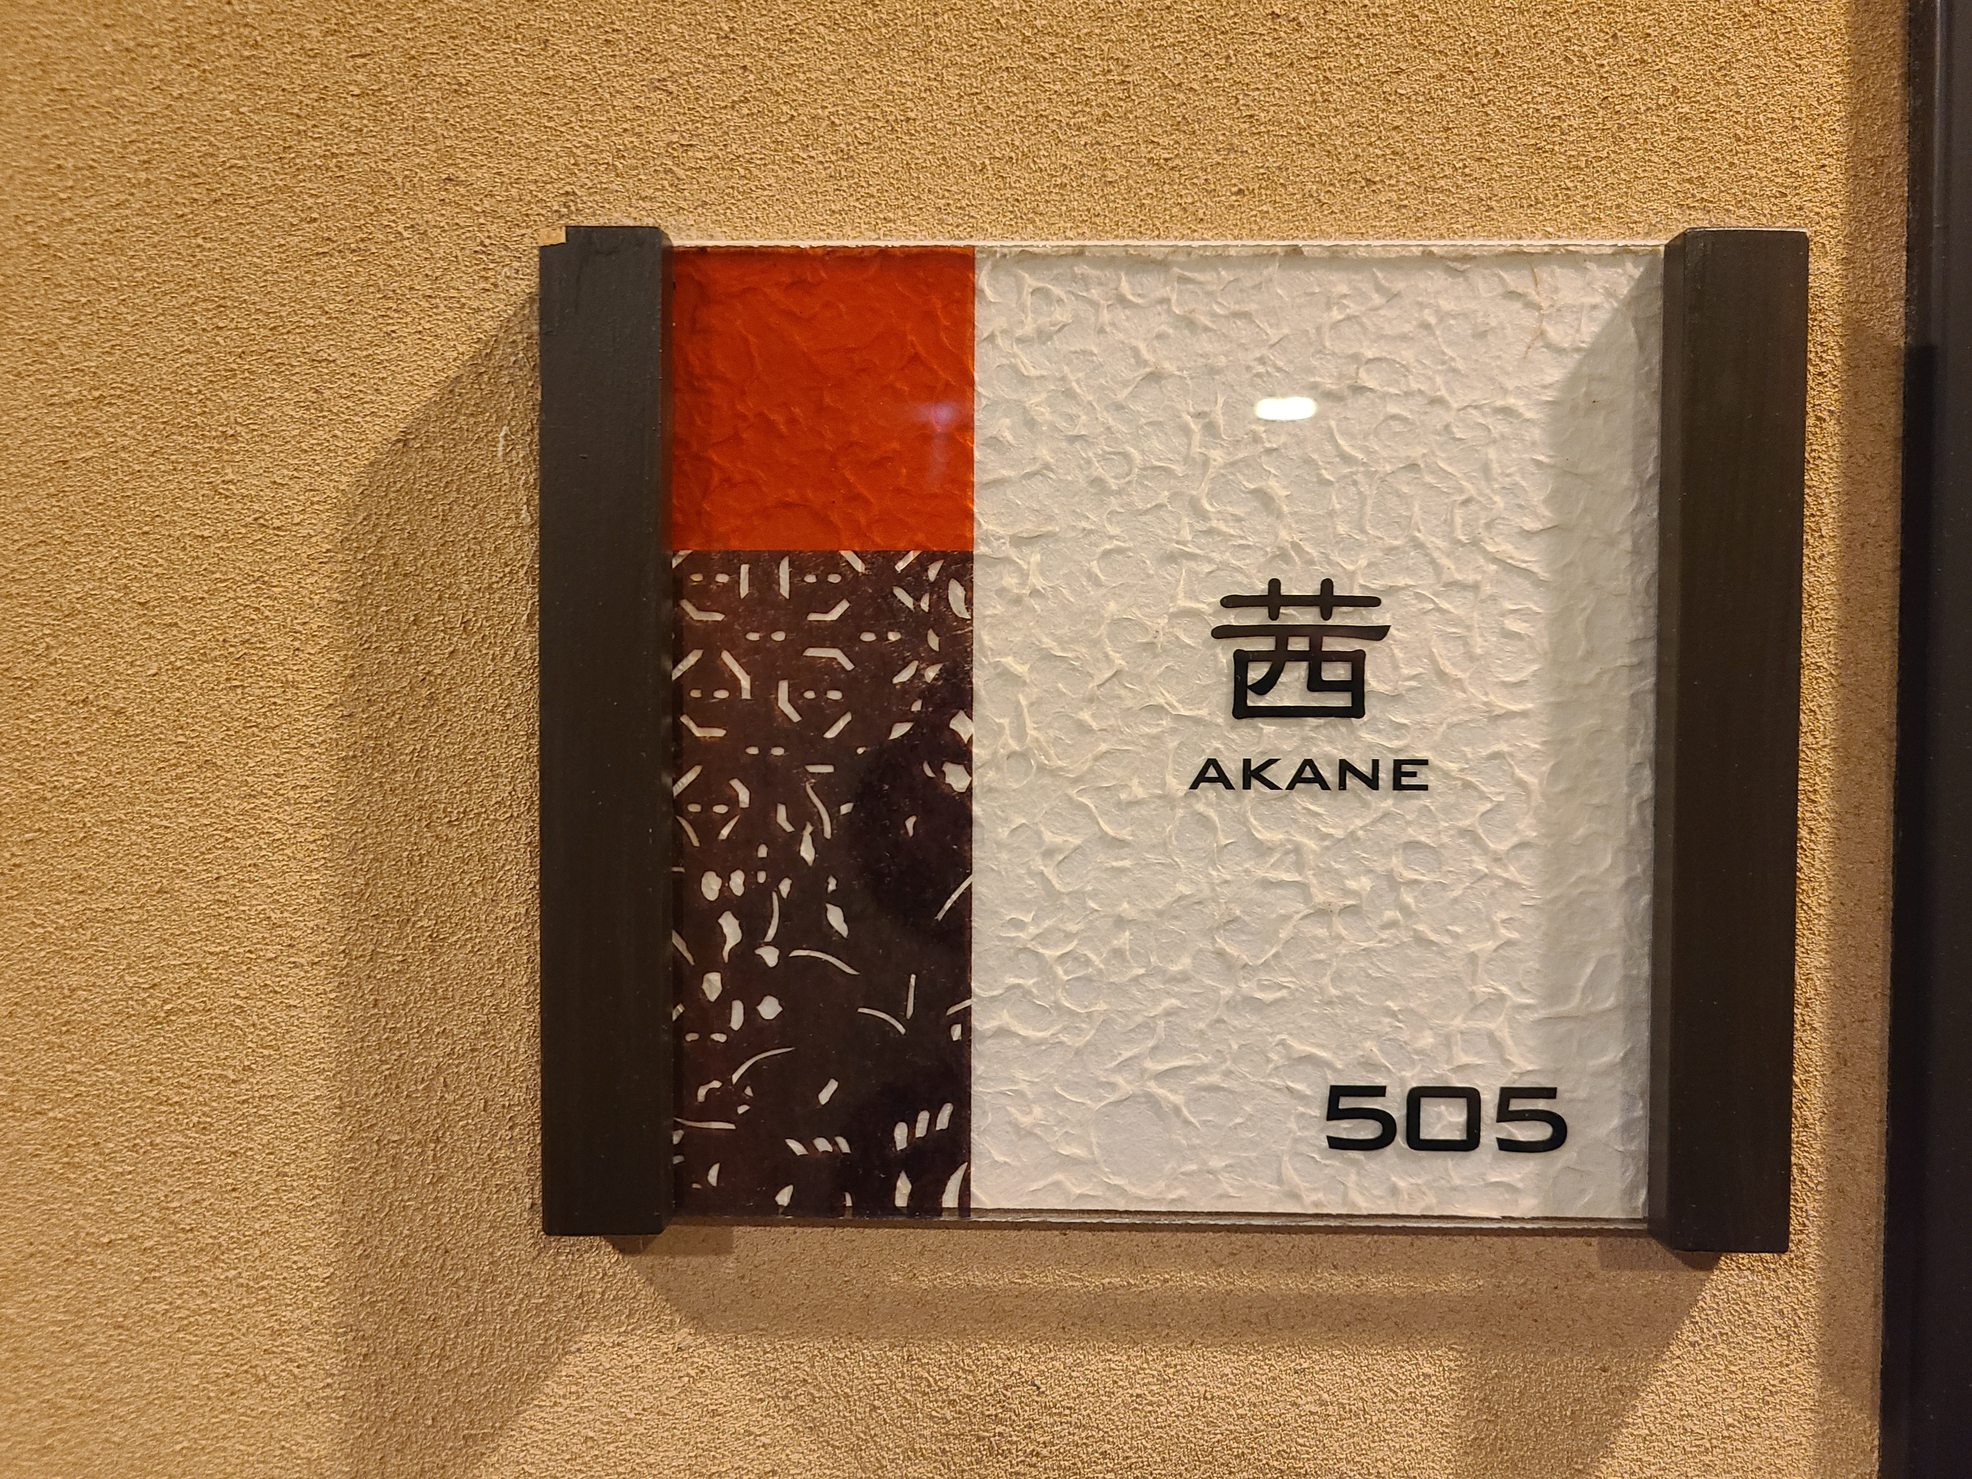 This placard is made of washi paper, and also includes a piece of the same katagami pattern paper that I noticed behind the front desk. 